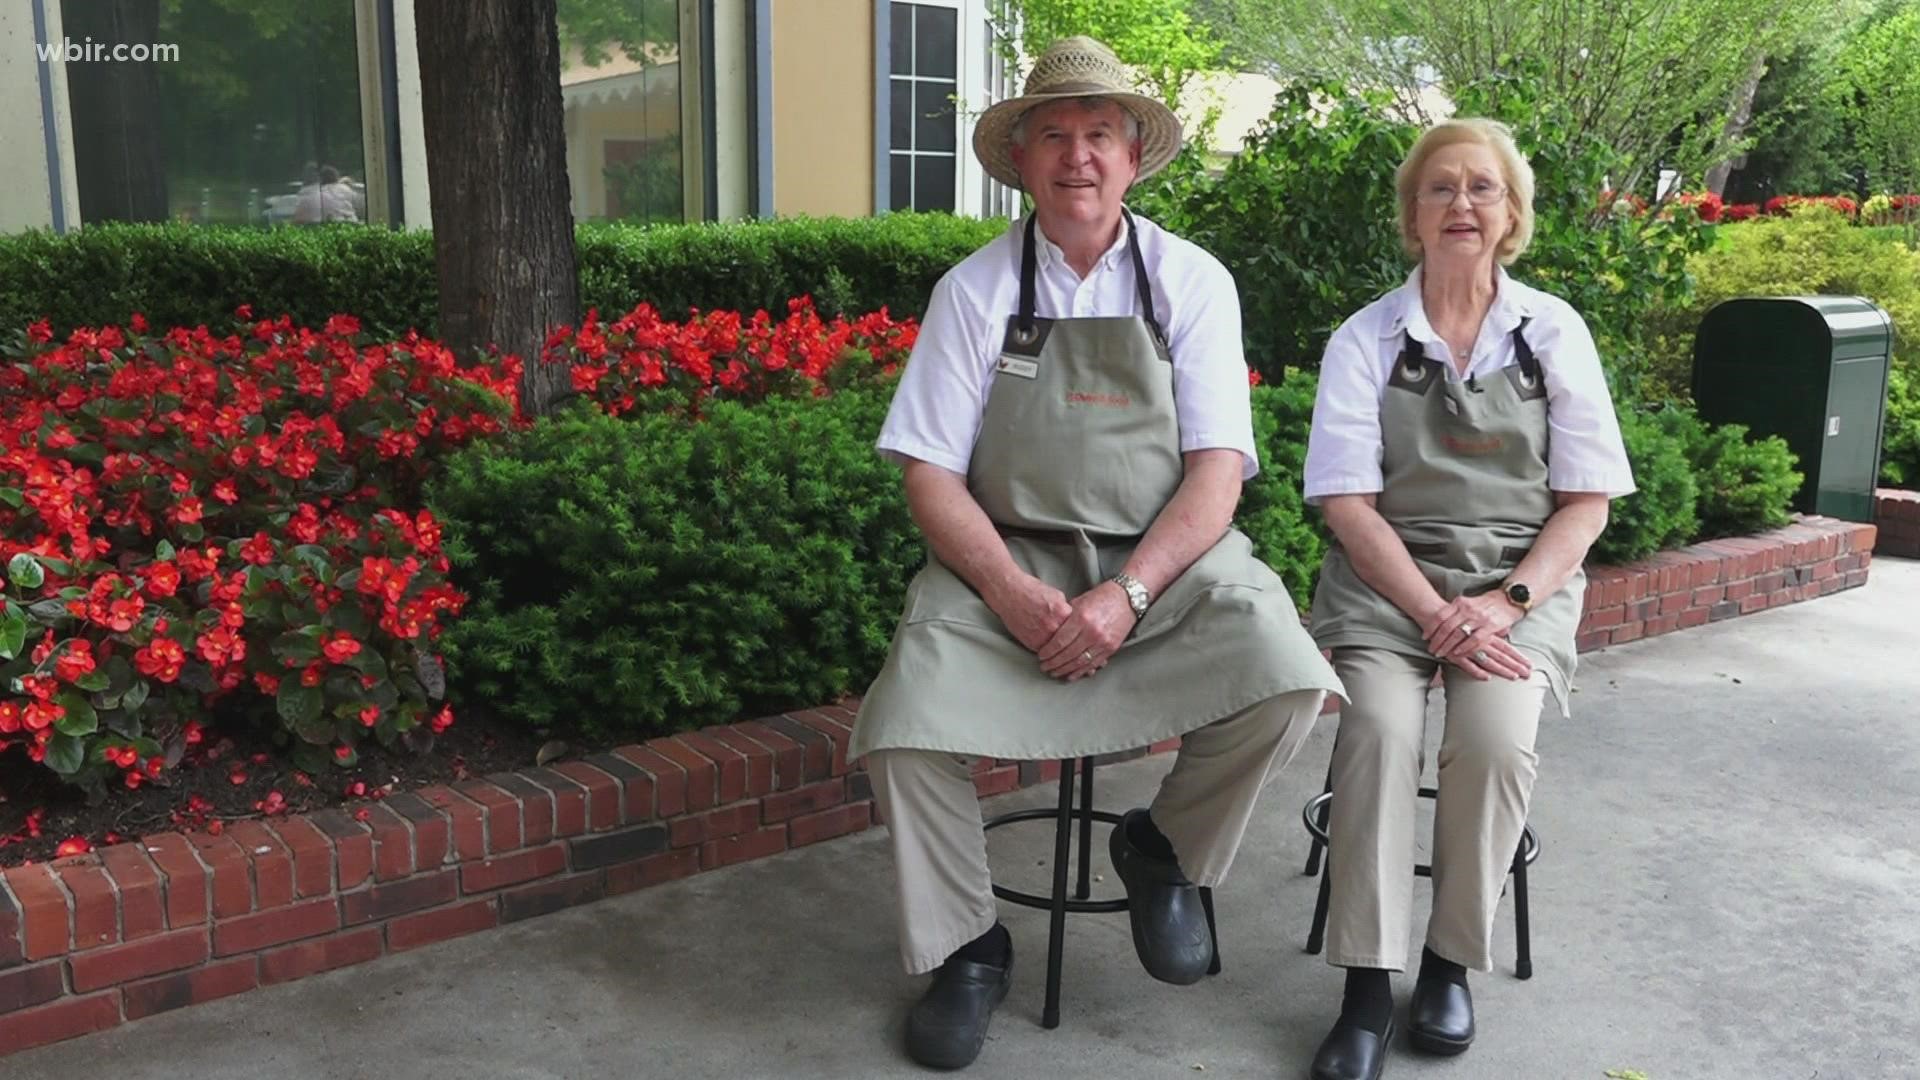 Buddy and Edye Gale Houser started working at Dollywood when the park was only five years old. Now, after over three decades, the pair has sights set on retirement.